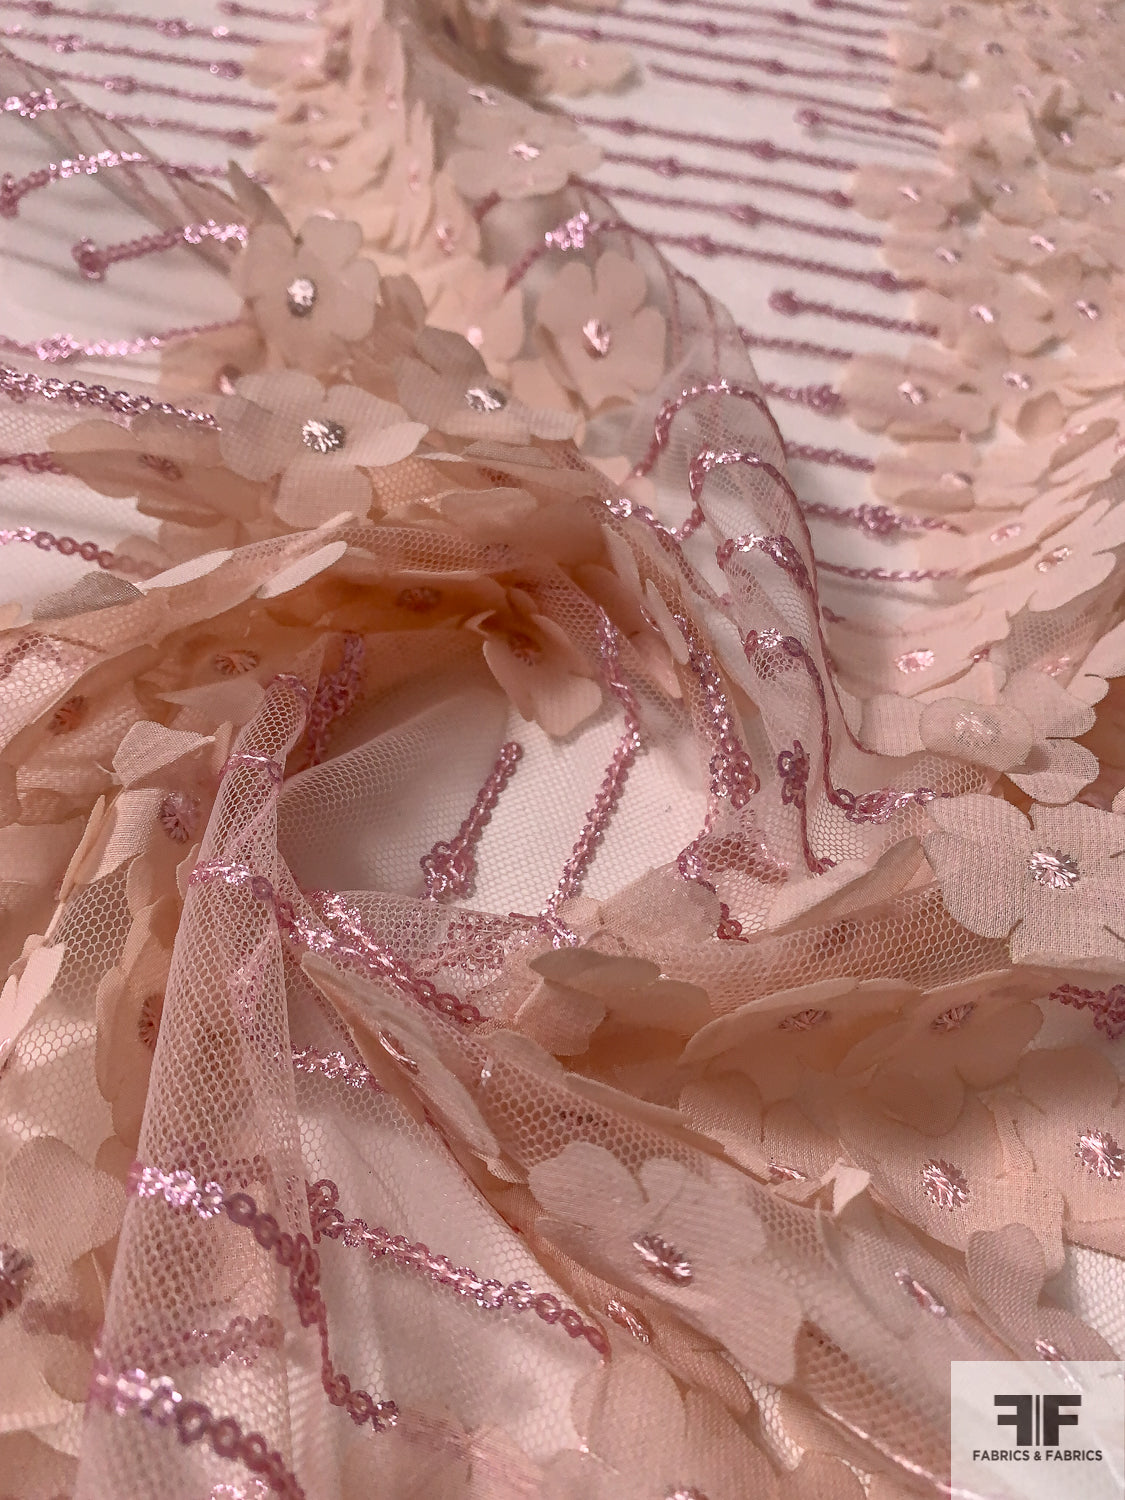 Fine Netting with 3D Floral Chiffon Appliqués and Sequins Detailing - Blush / Pink